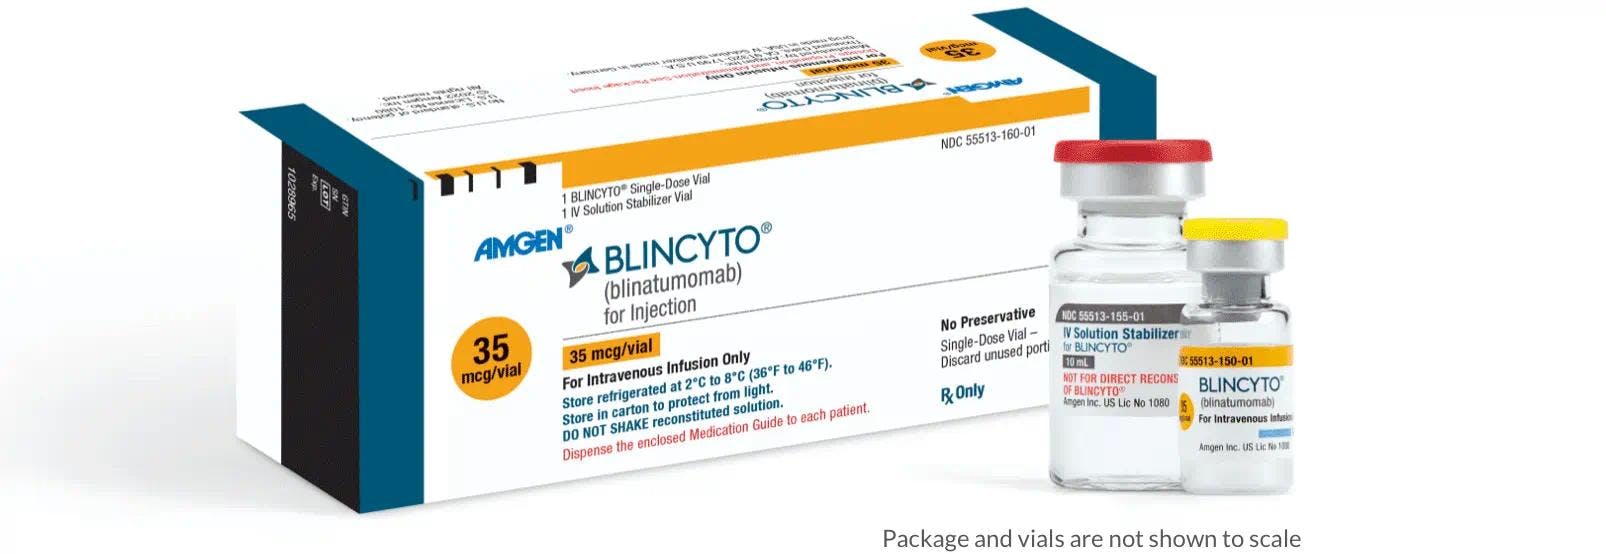 FDA Converts Blincyto to Full Approval for Minimal Residual Disease in B-Cell ALL